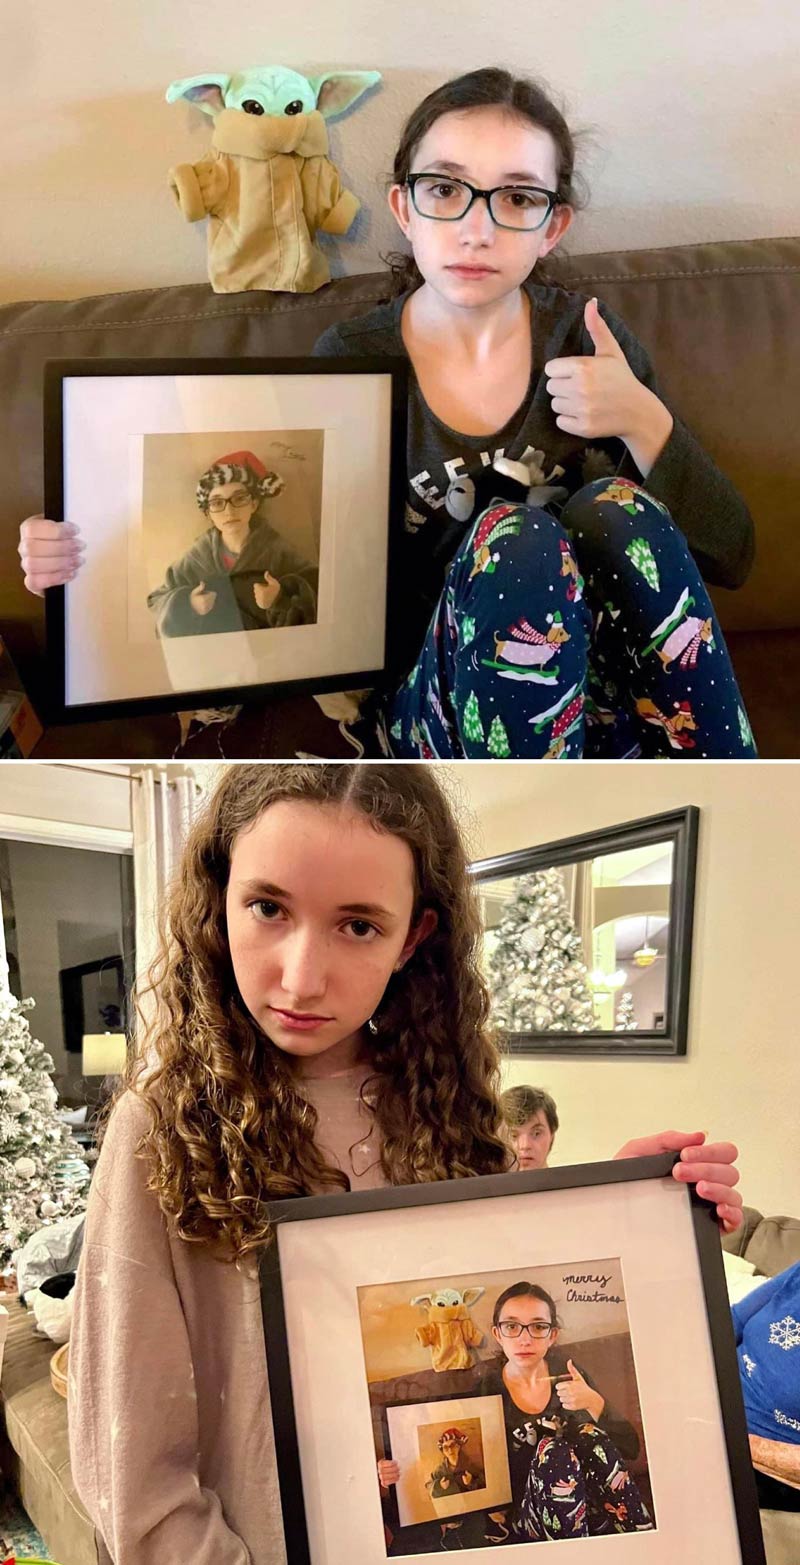 Last year for Christmas my daughter got my son a picture of herself. This year she got him a picture of herself holding the picture she got him last year